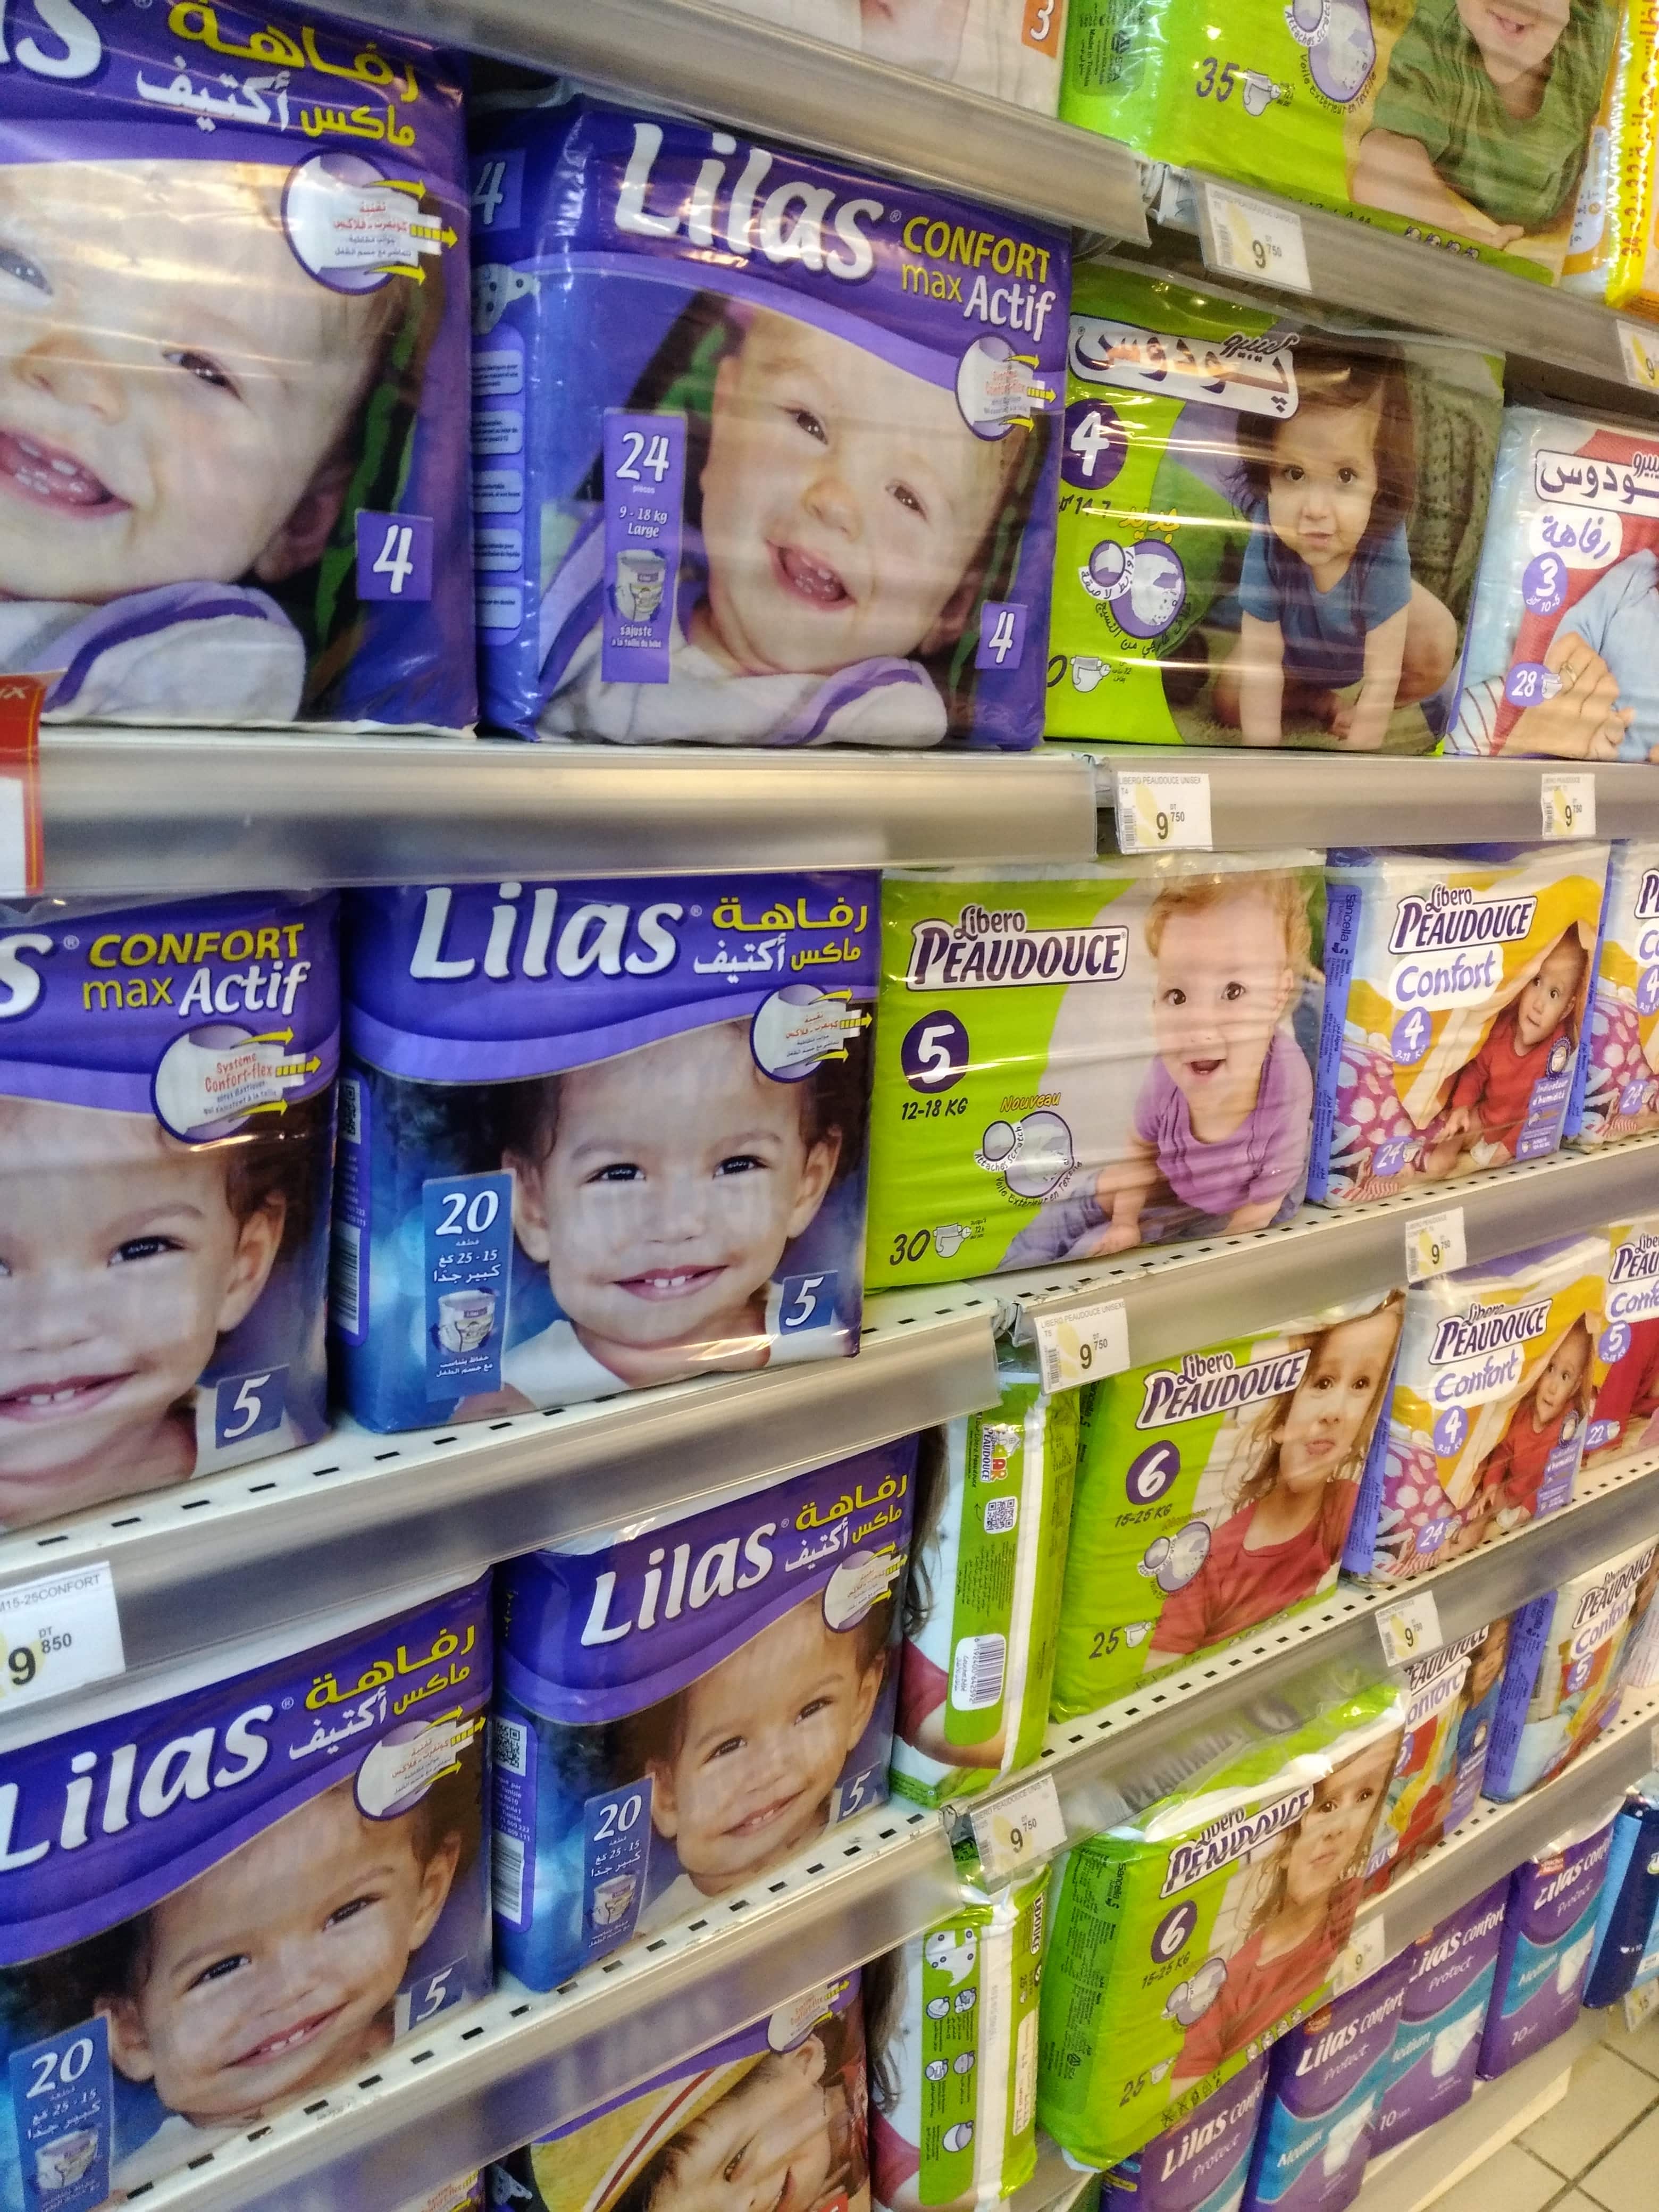 CASE4 : Development of the luxury diaper market in major African consuming markets